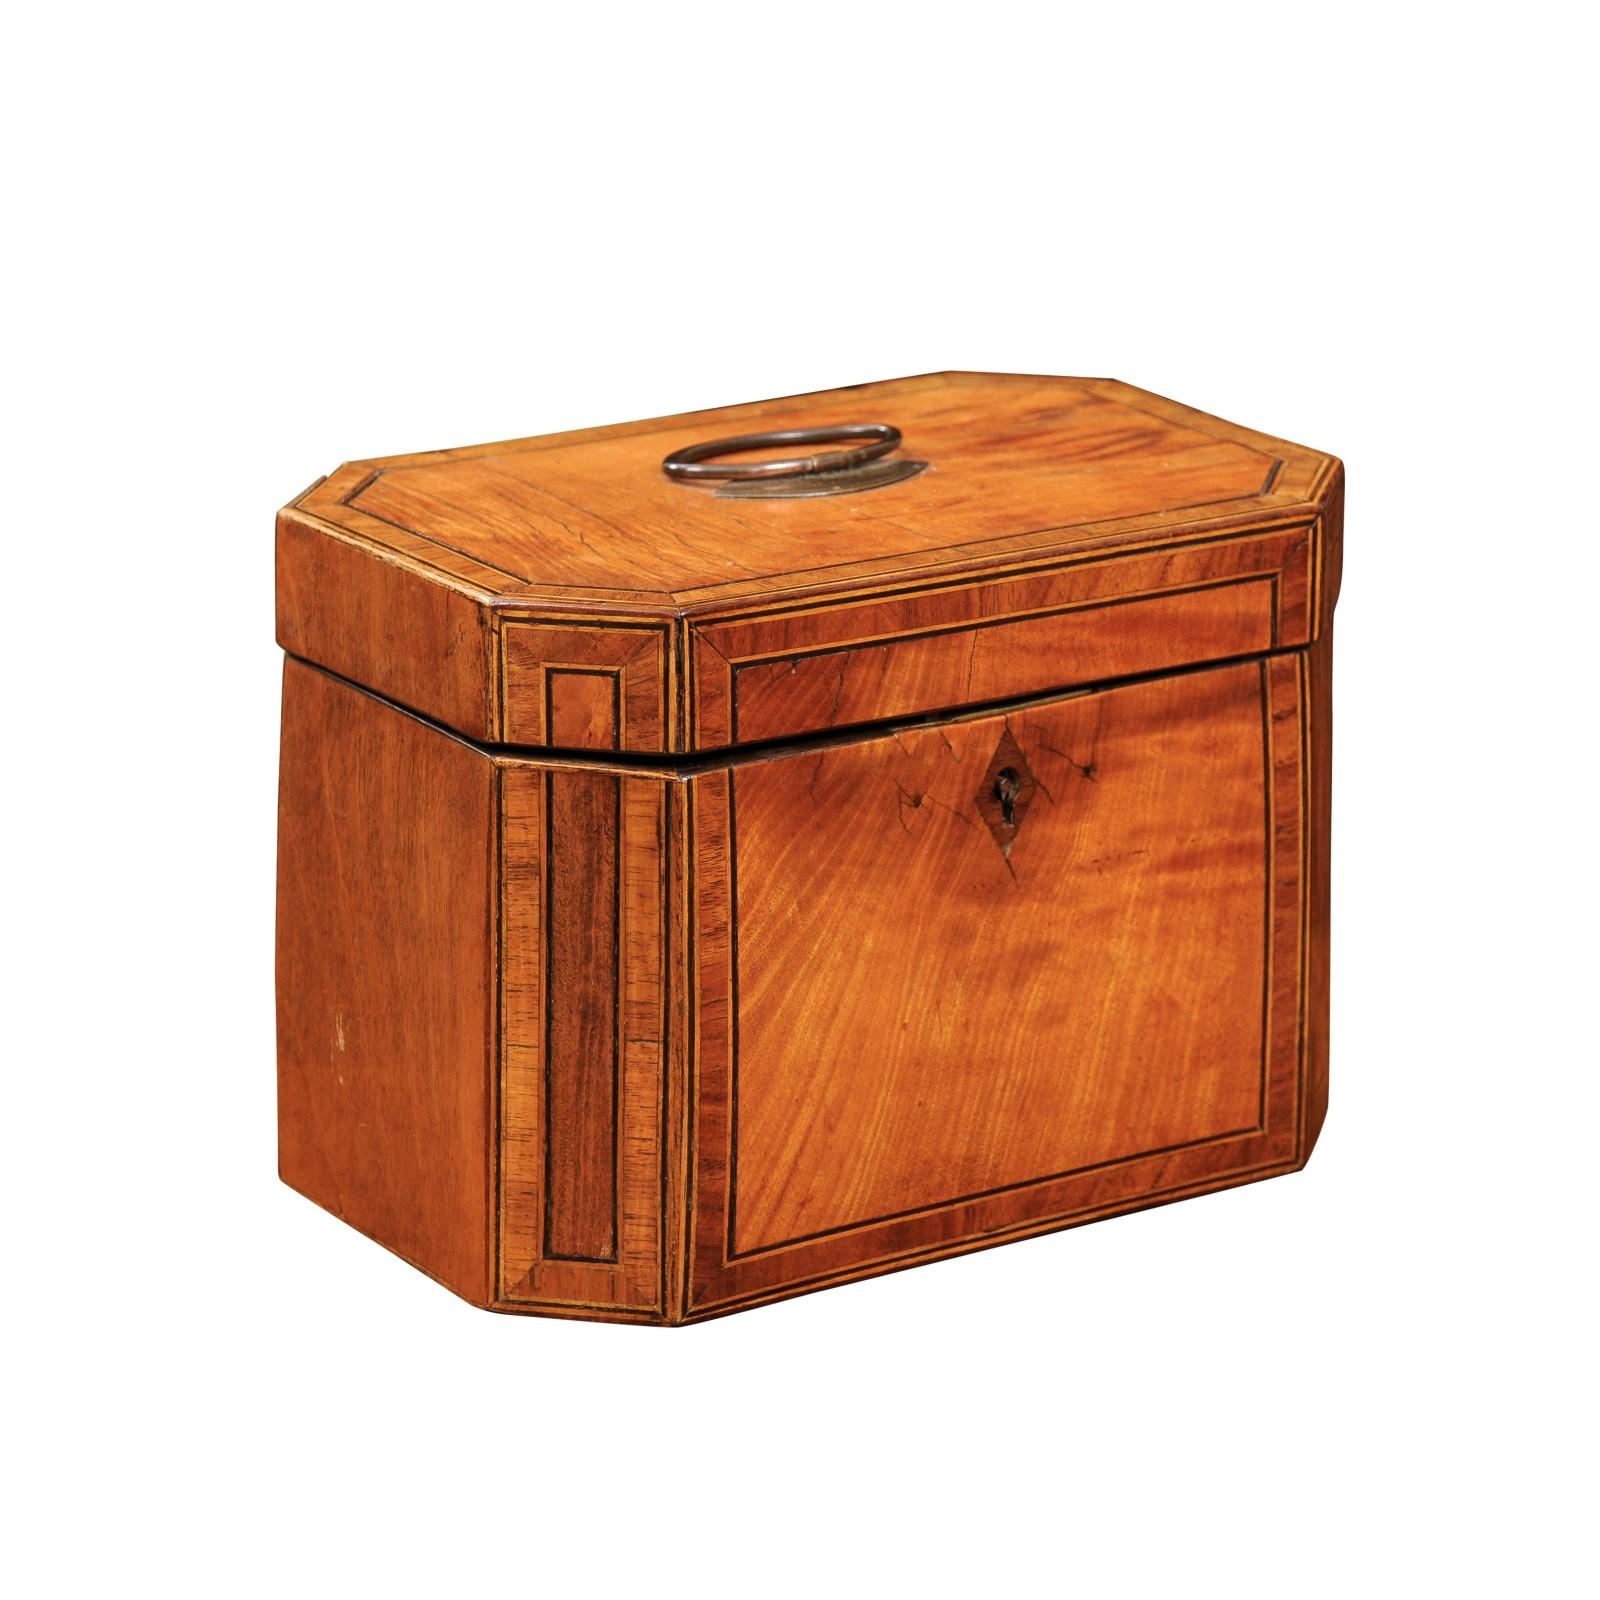 English Octagonal Satinwood Tea Caddy with Rosewood Cross Banding and String Inlay, Early 19th Century